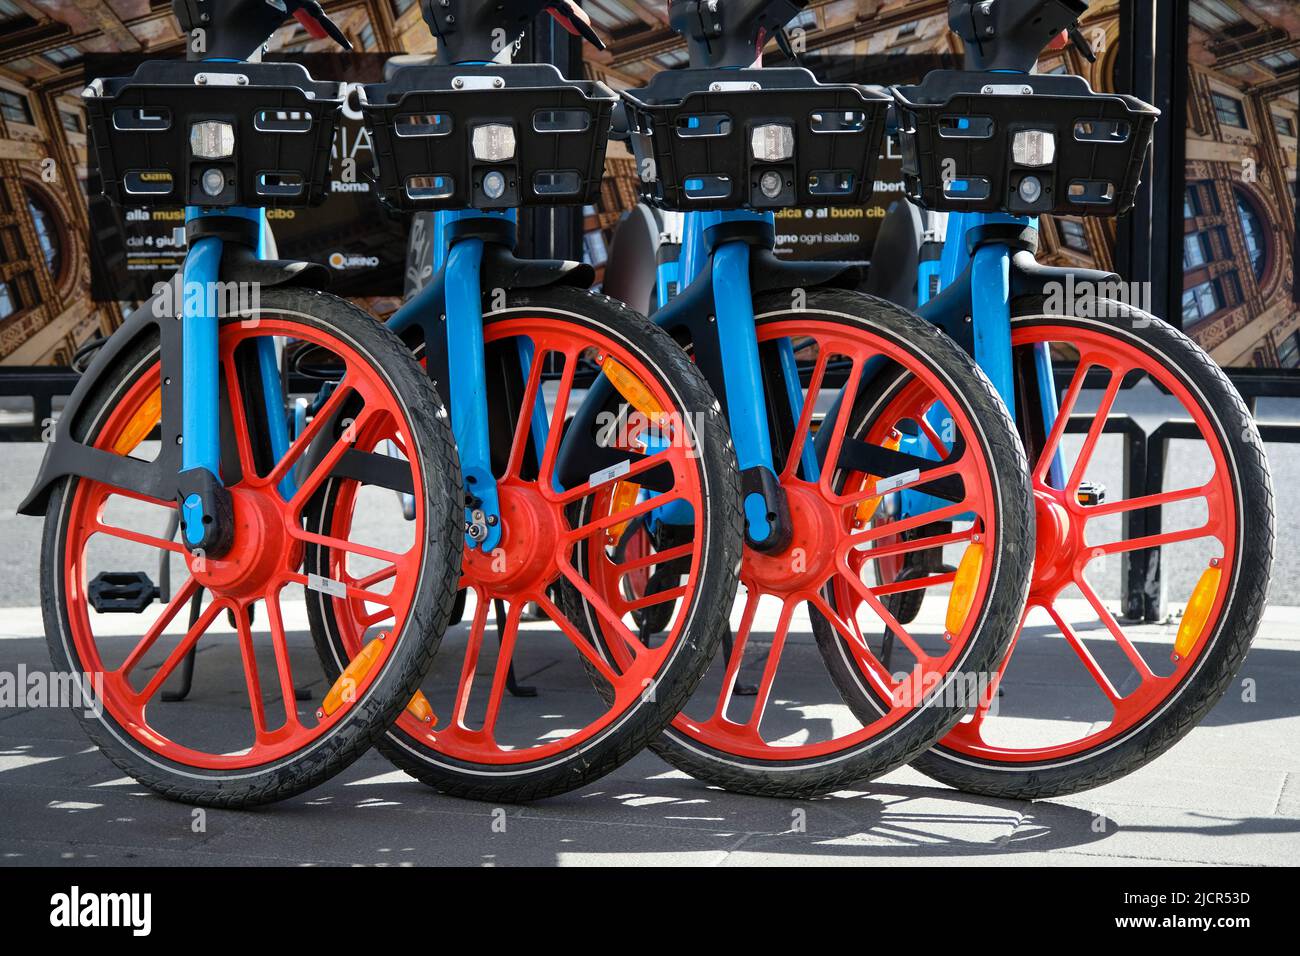 Four rental bicycles lined up with red rims on sidewalk in Rome, Italy. Stock Photo